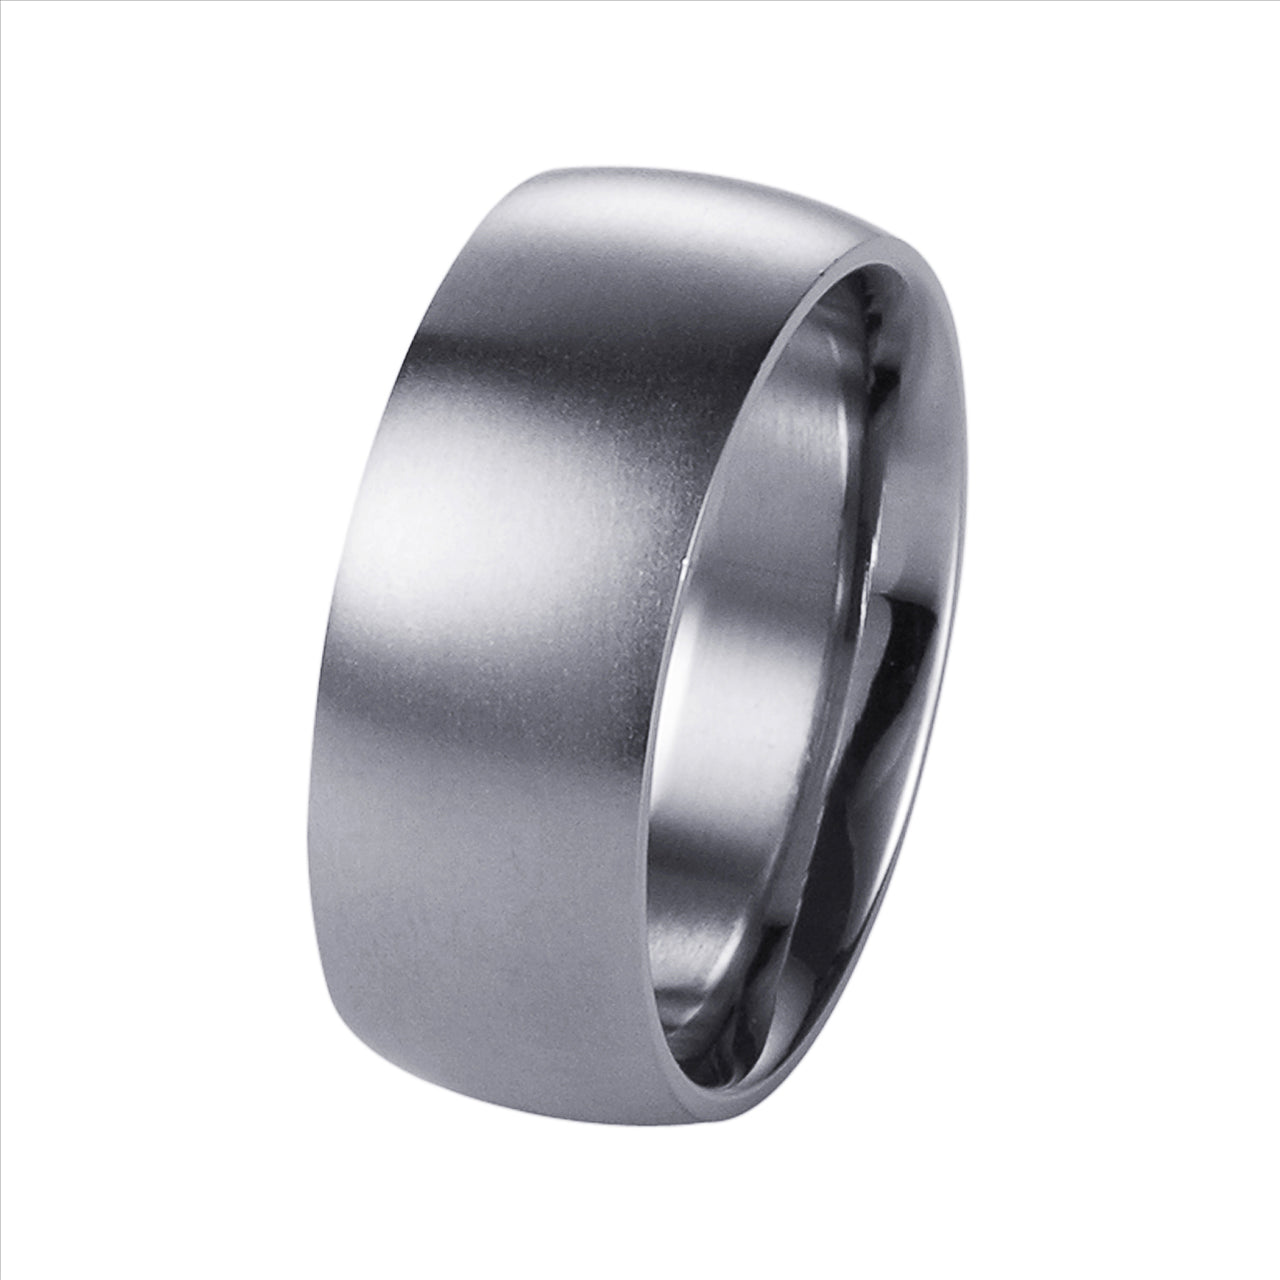 Brushed Stainless Steel Band Ring